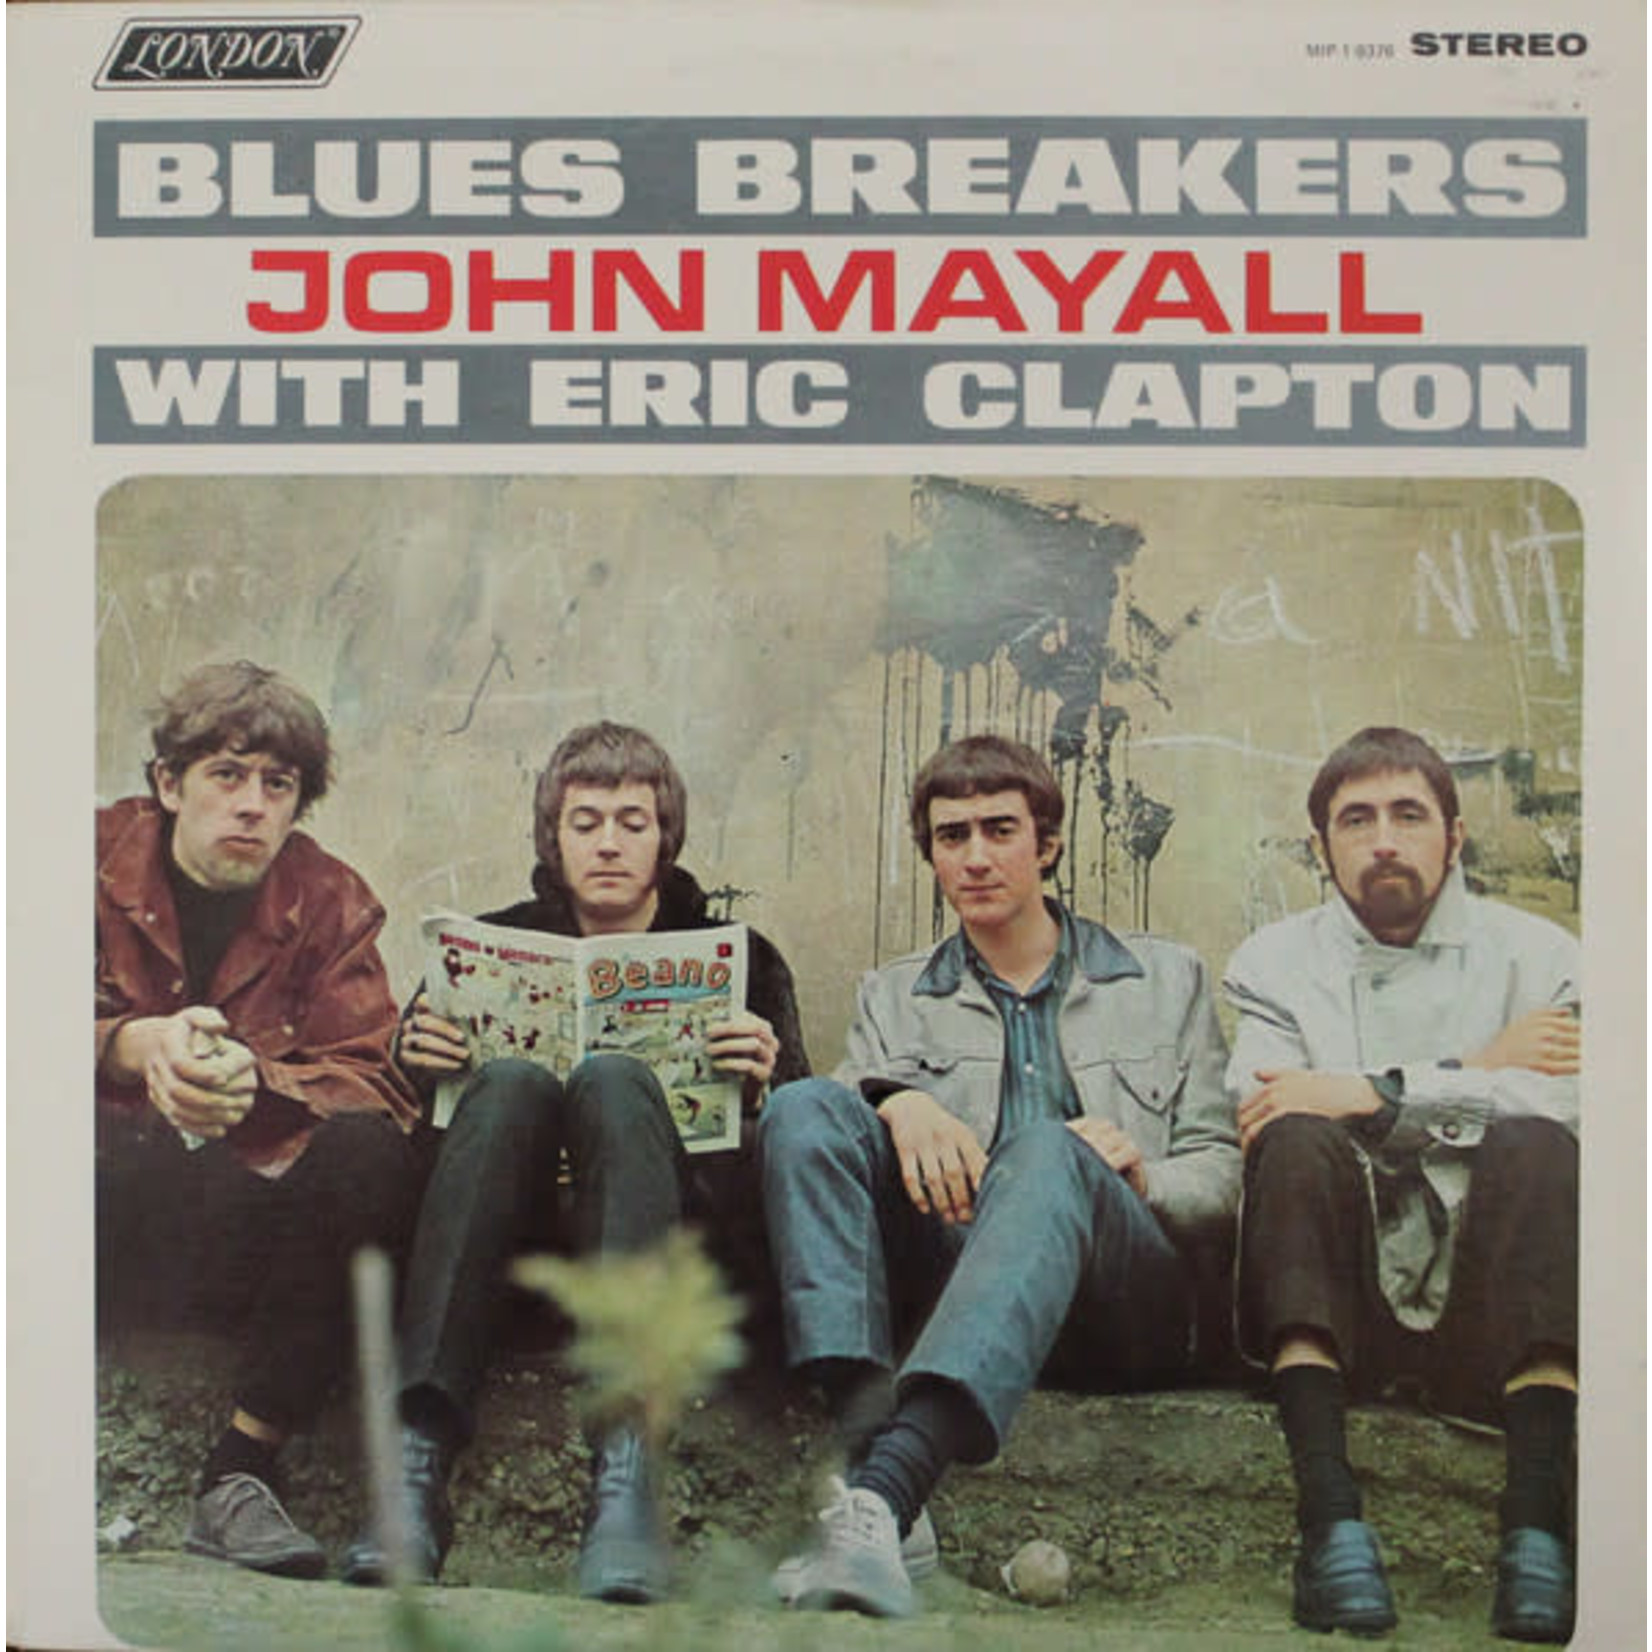 [Vintage] John Mayall w/ Eric Clapton - Blues Breakers (Beano cover, reissue)